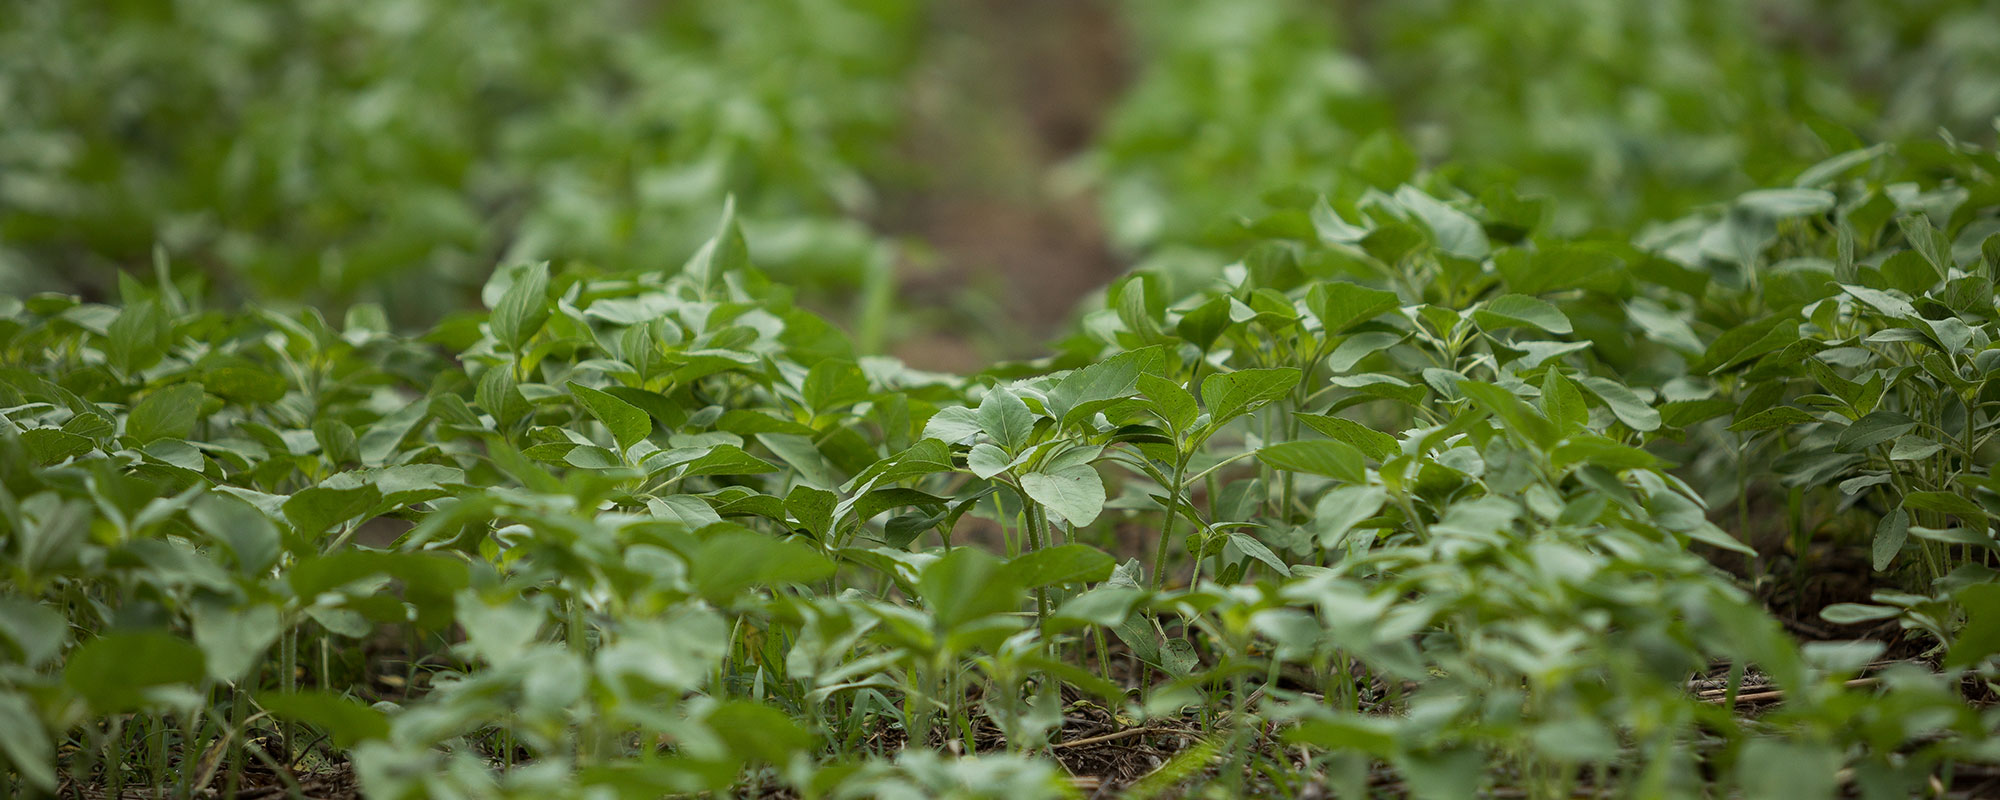 So You Want To Grow Cover Crops: 3 Questions to Ask Before You Start